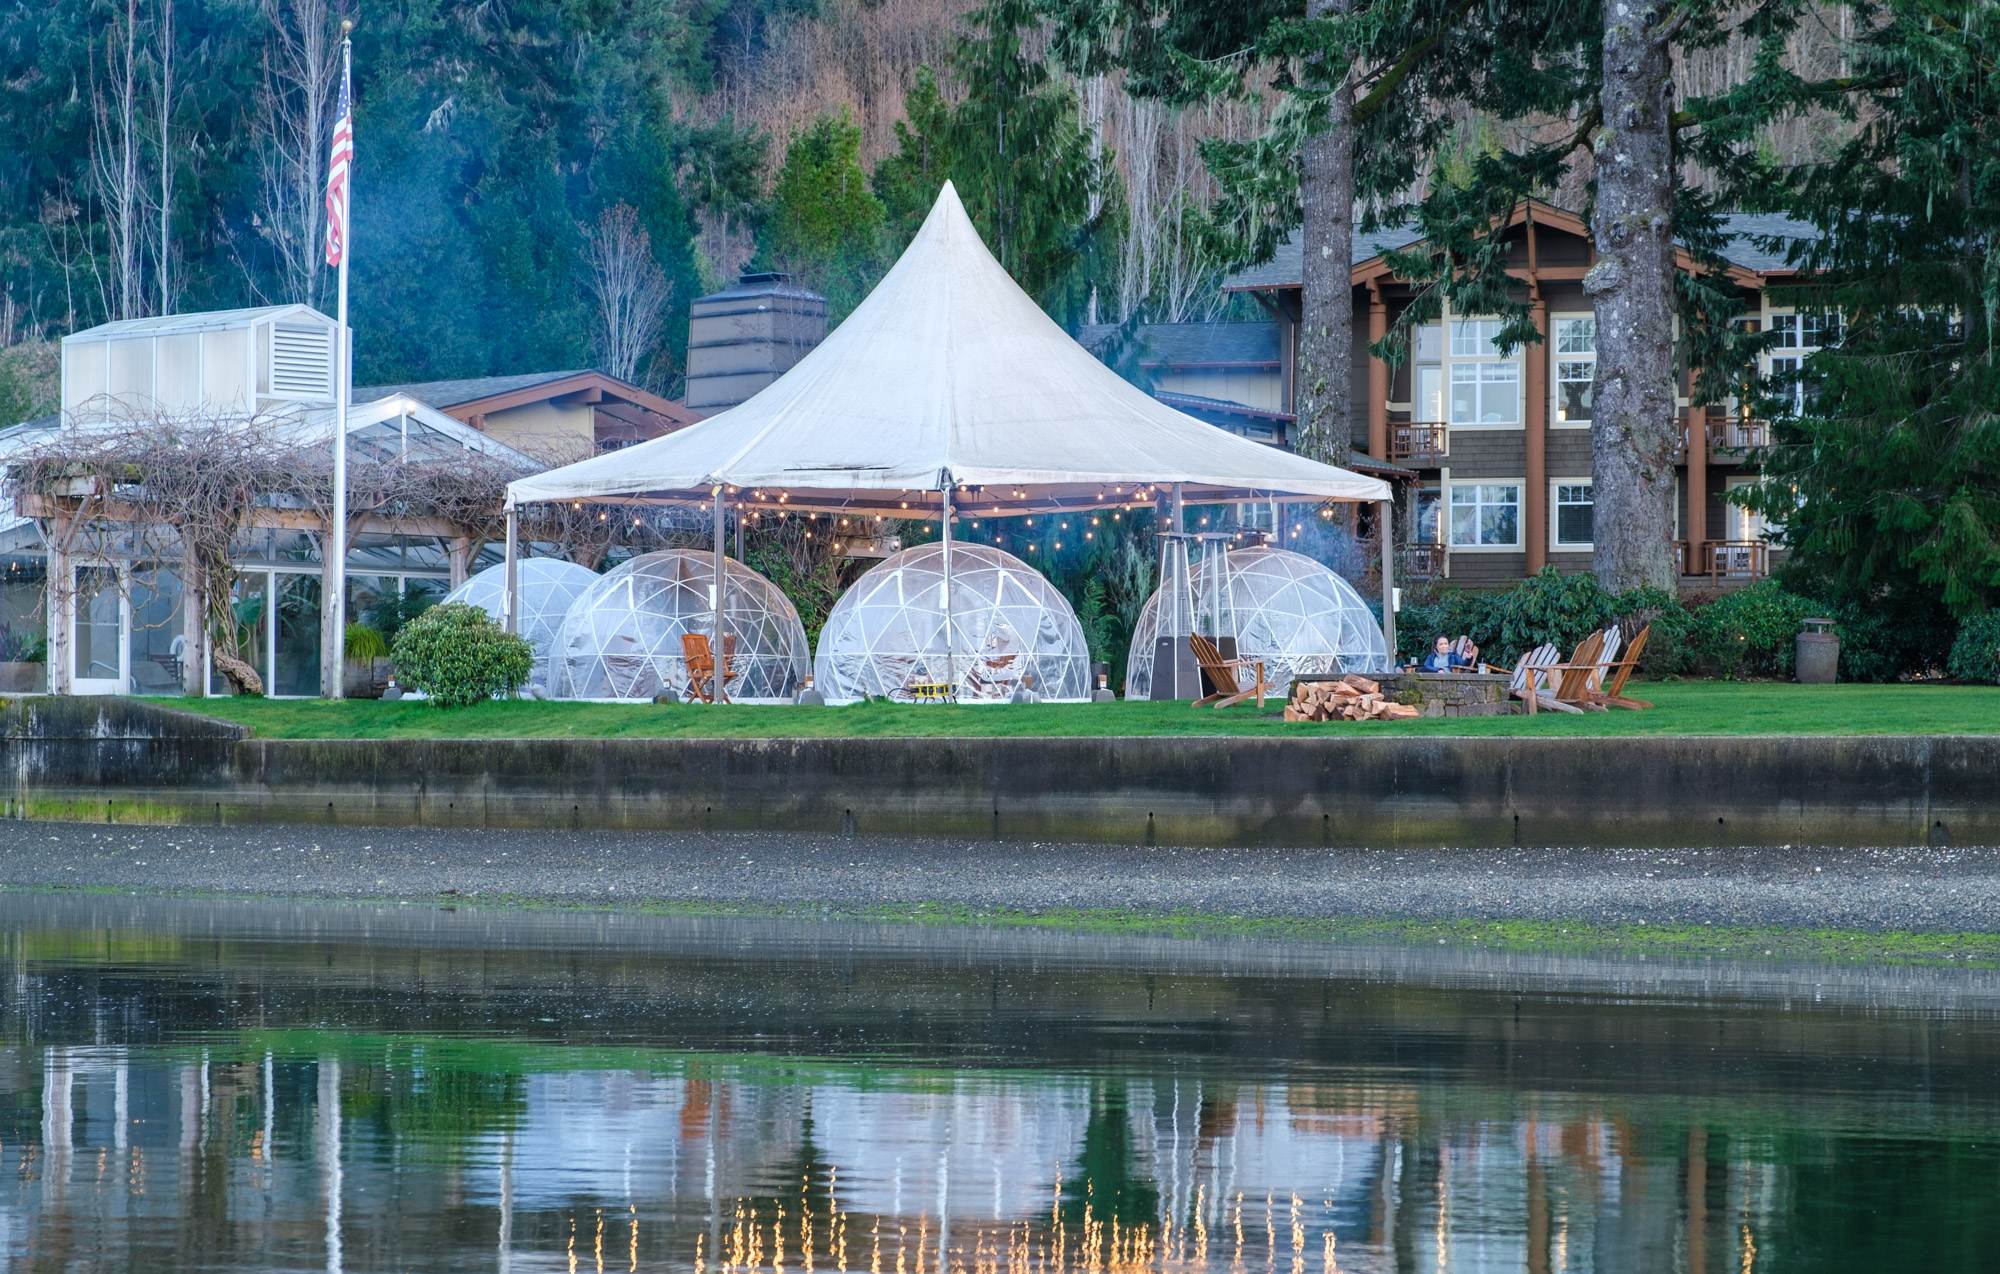 Culinary adventure tents on the lawn of the Alderbrook Resort & Spa